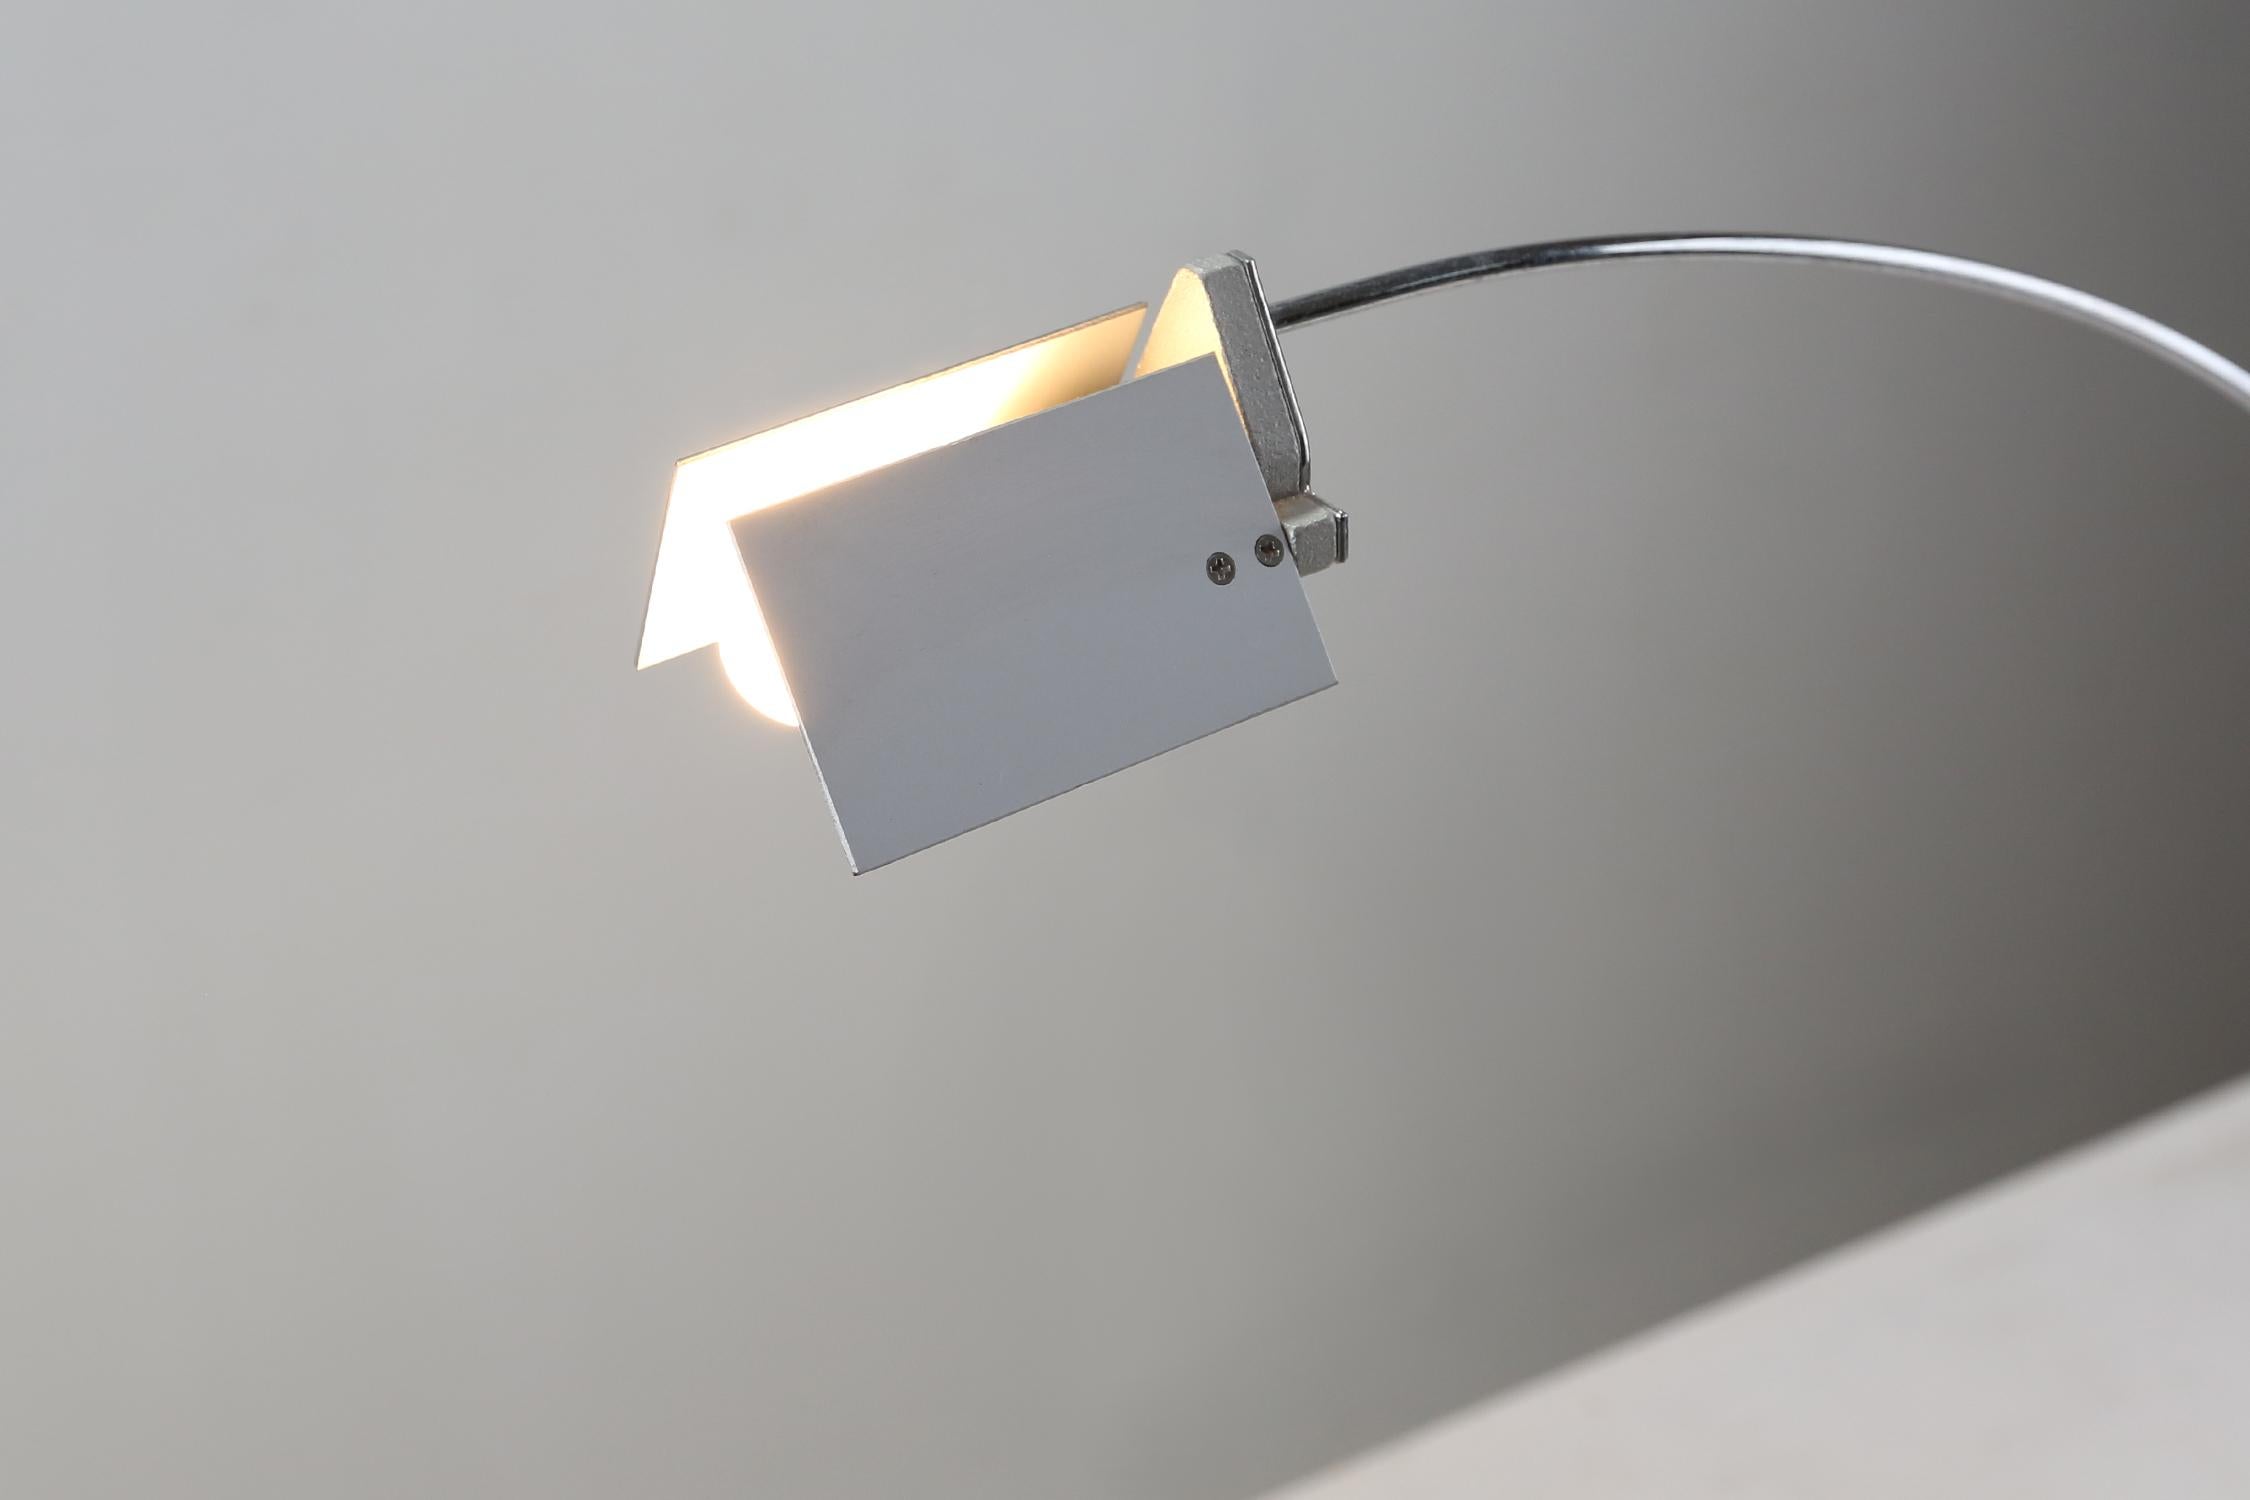 Low-voltage table lamp made in 1994 with electronic plug-in transformer and cable switch for dual light intensity. With a glass base in cut float glass and a chromed metal body with 360° horizontal rotation.